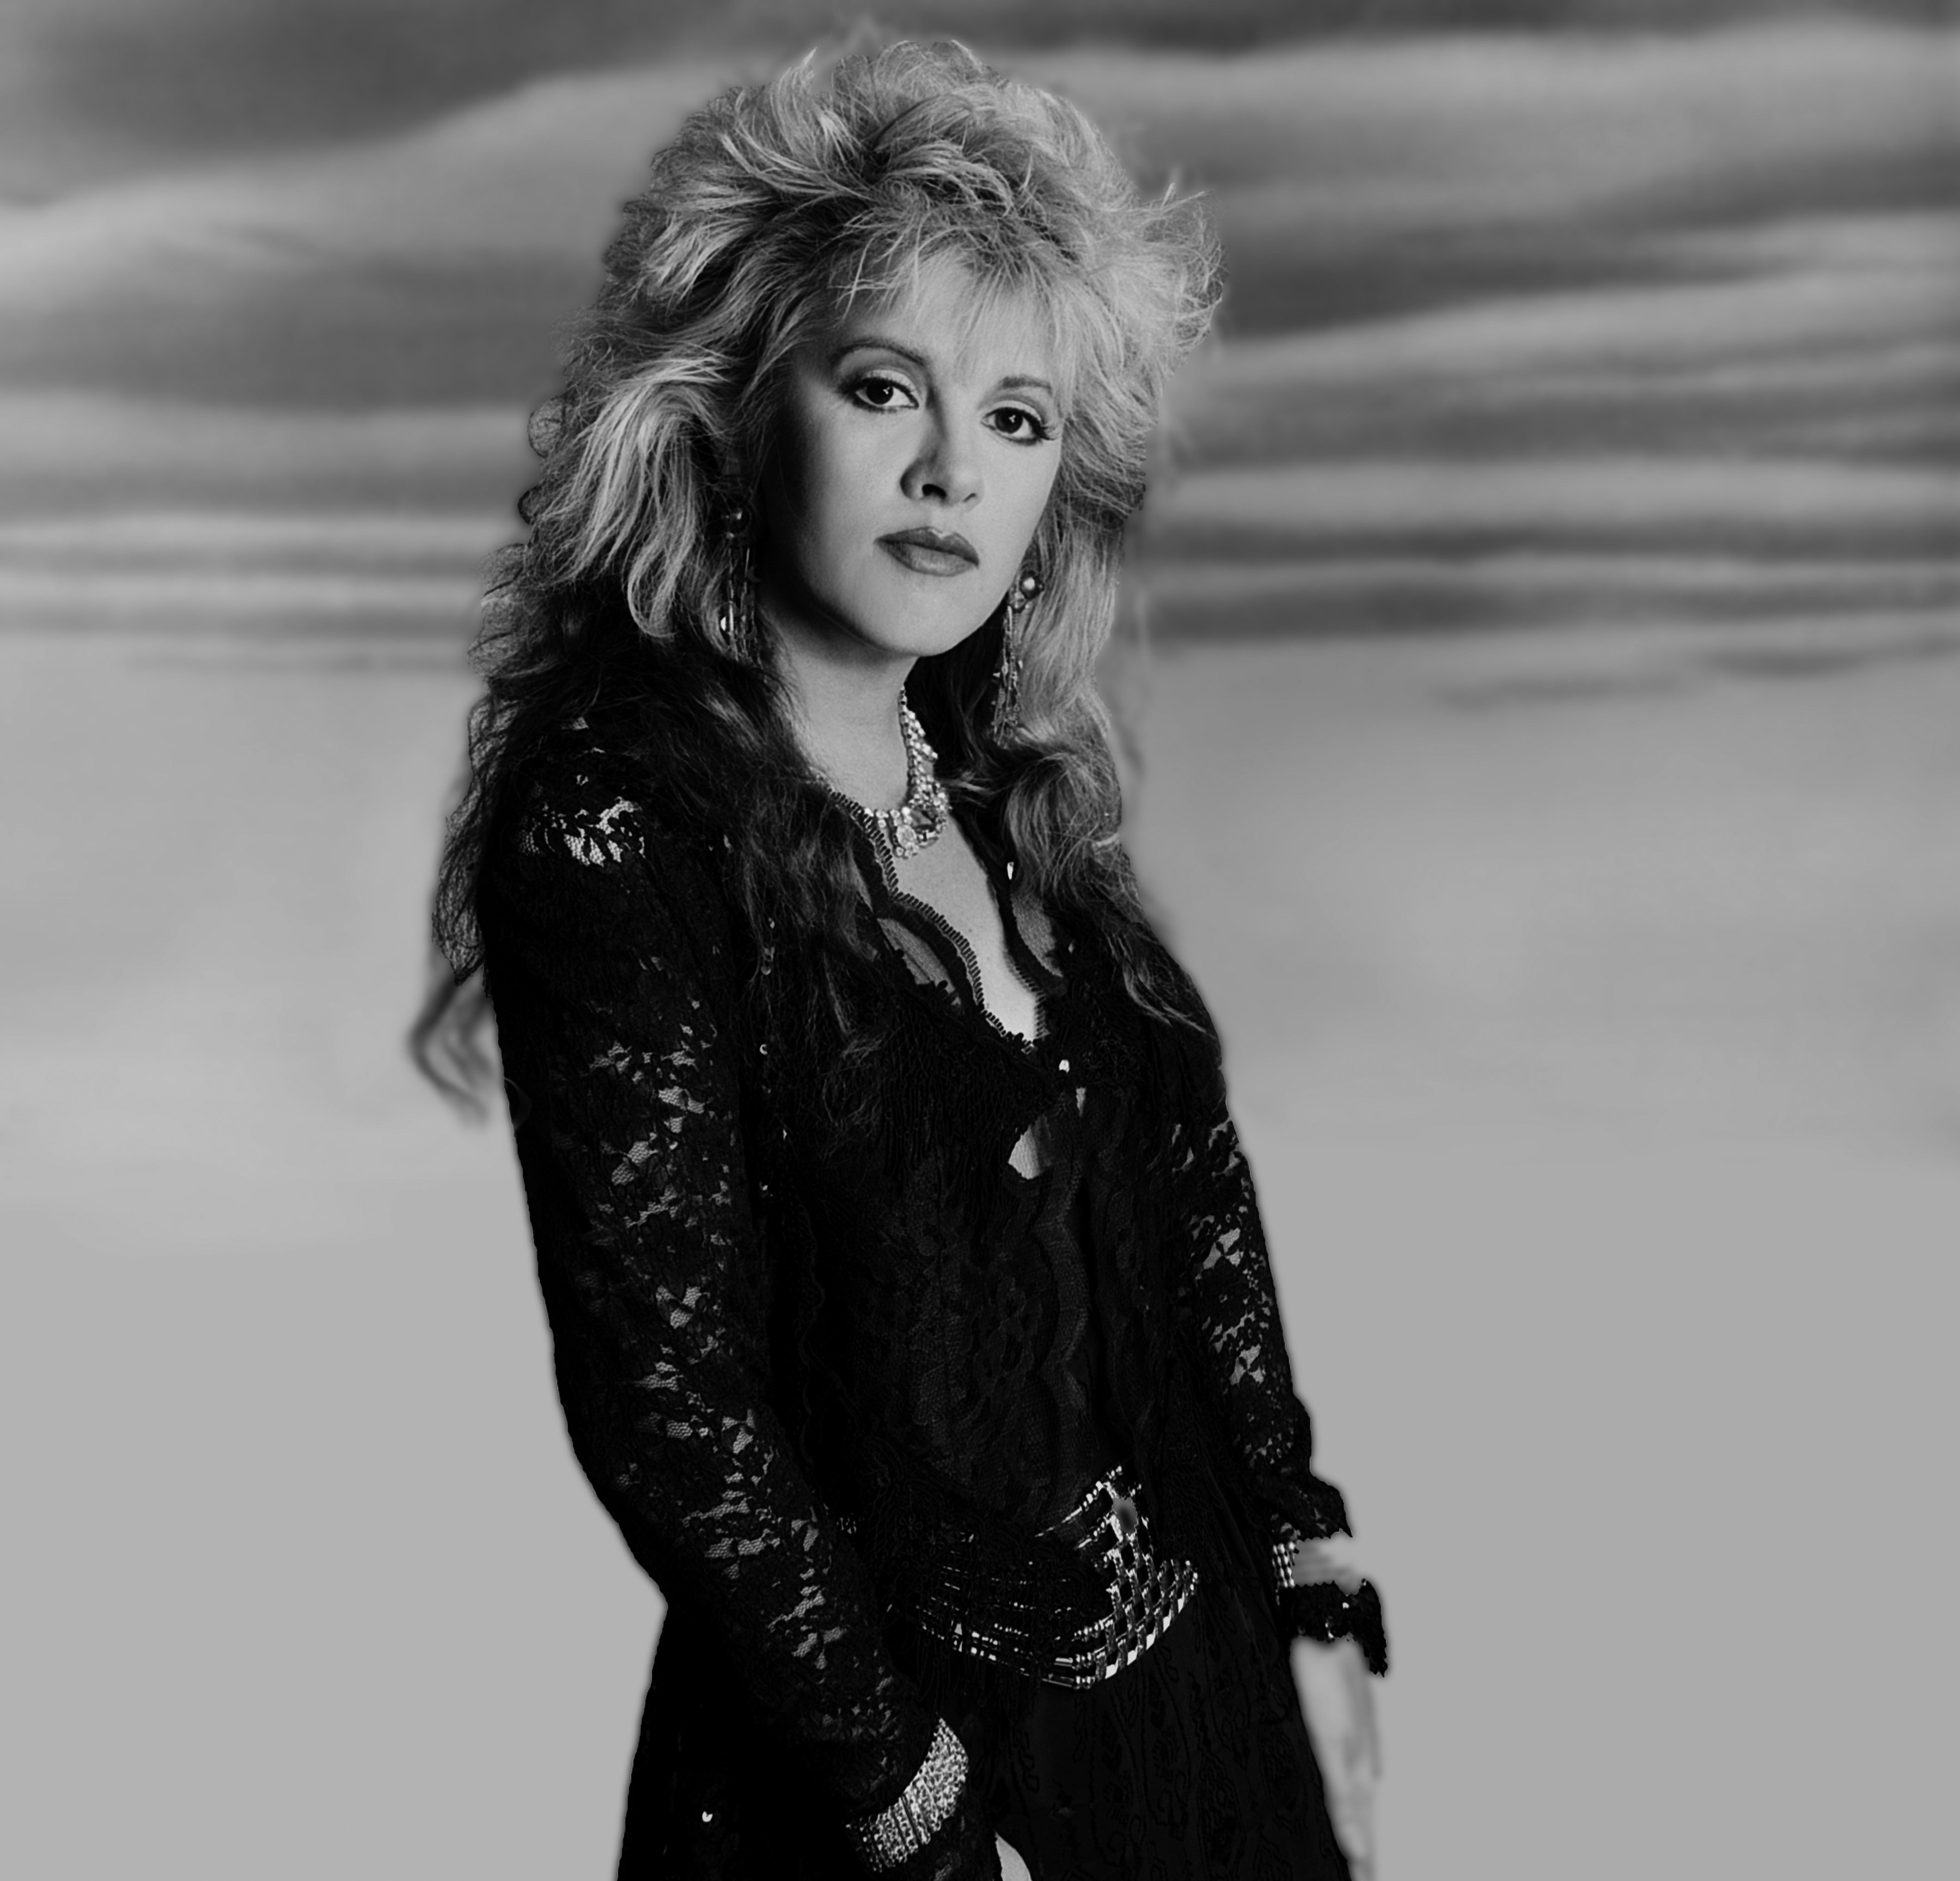 A photo of Stevie Nicks in the '80s wearing a black lace shirt.